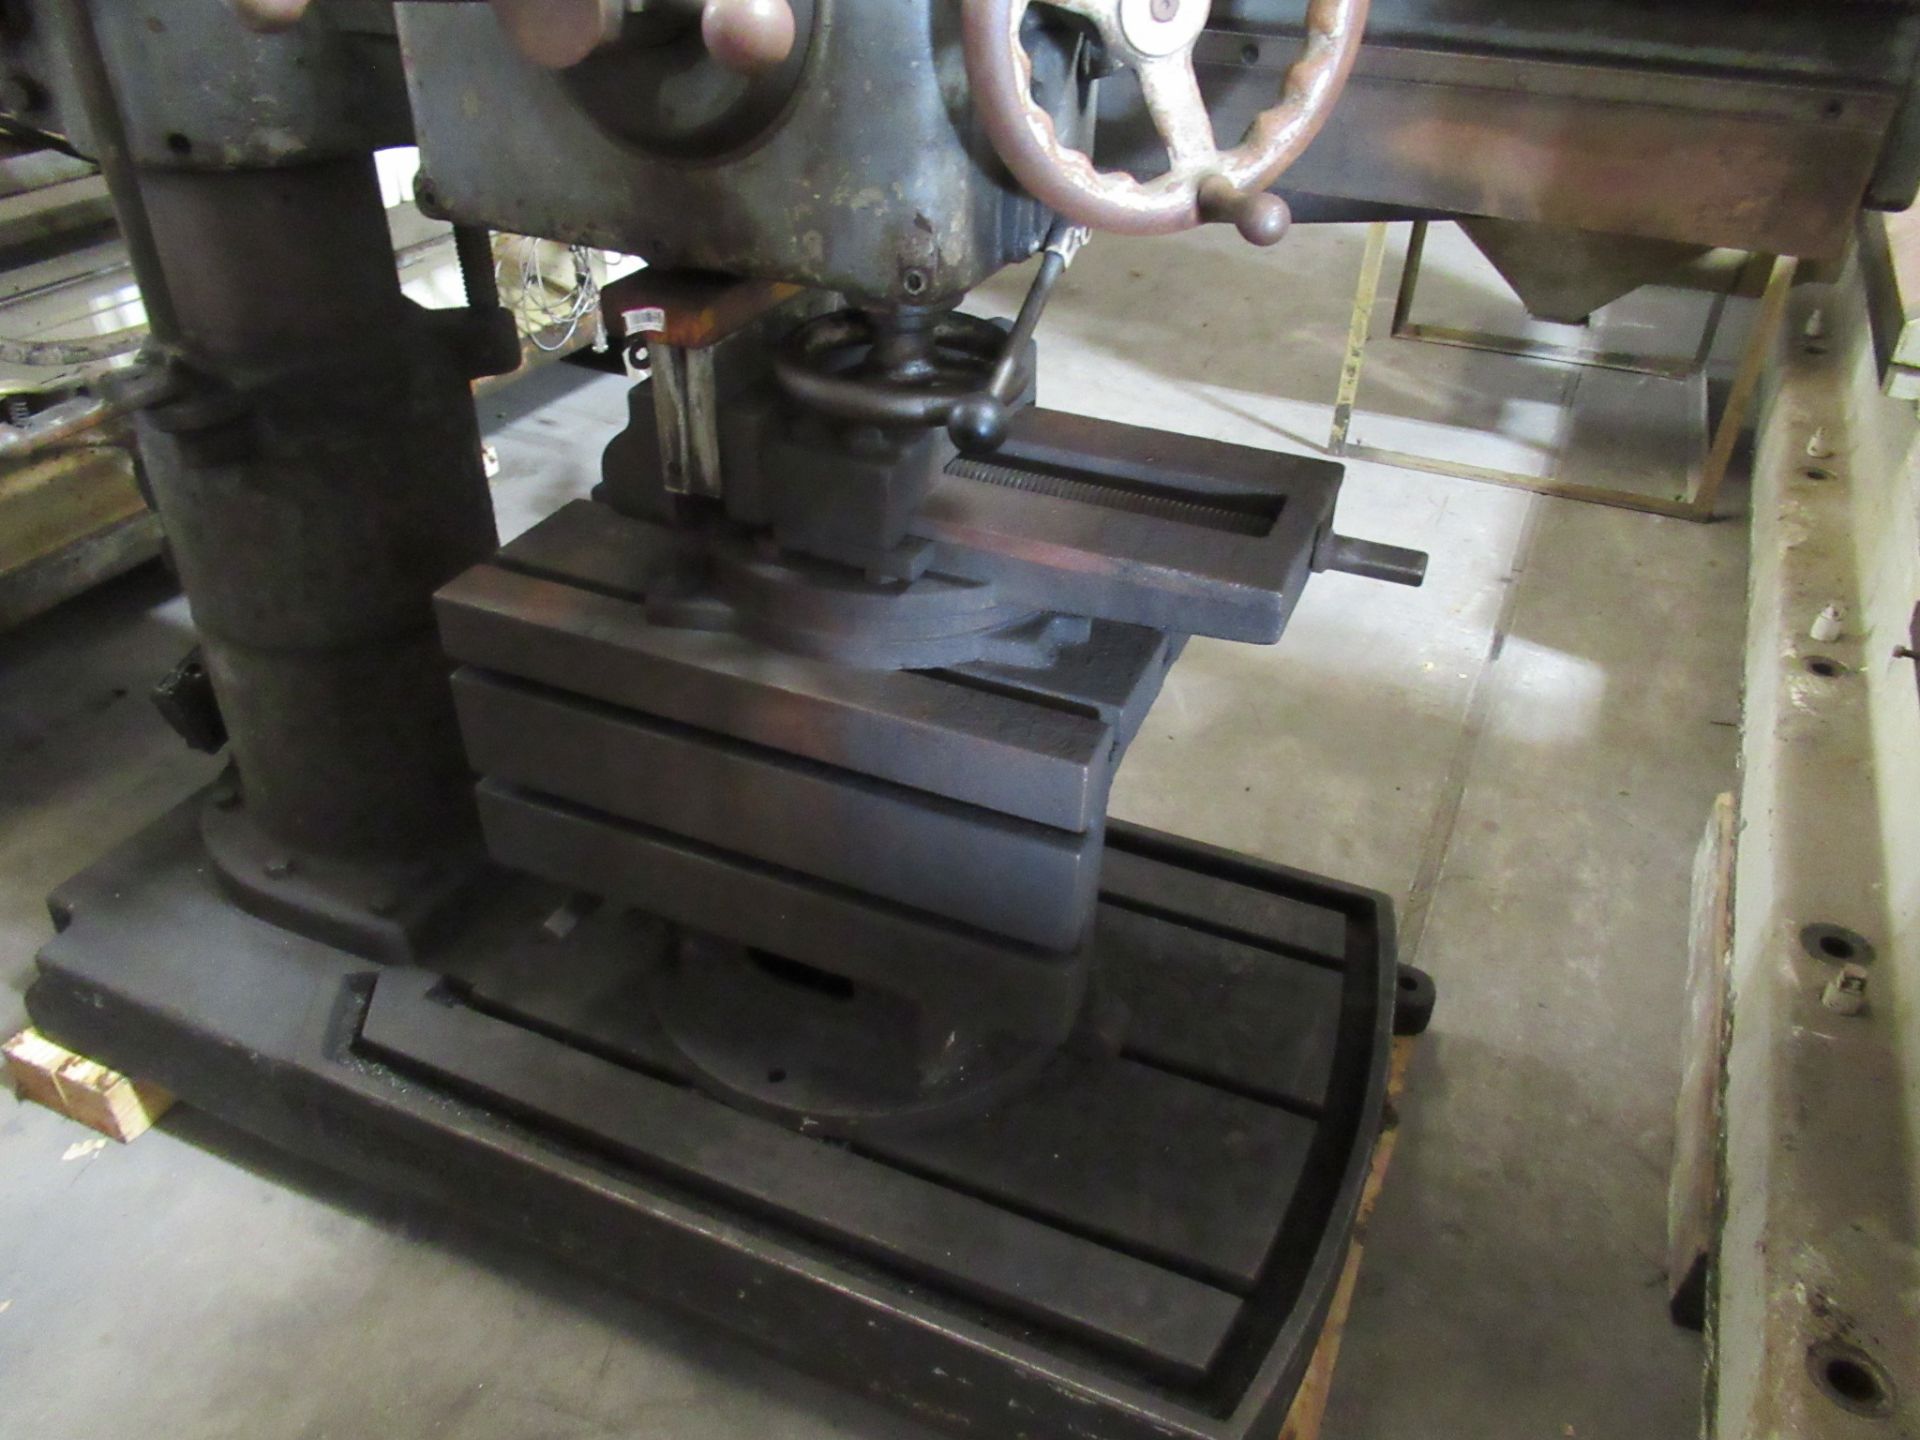 3’ X 9” MORRIS RADIAL DRILL 208V, Box Table, Vise, ($150 loading charge) (Location U: Stored At Able - Image 2 of 3